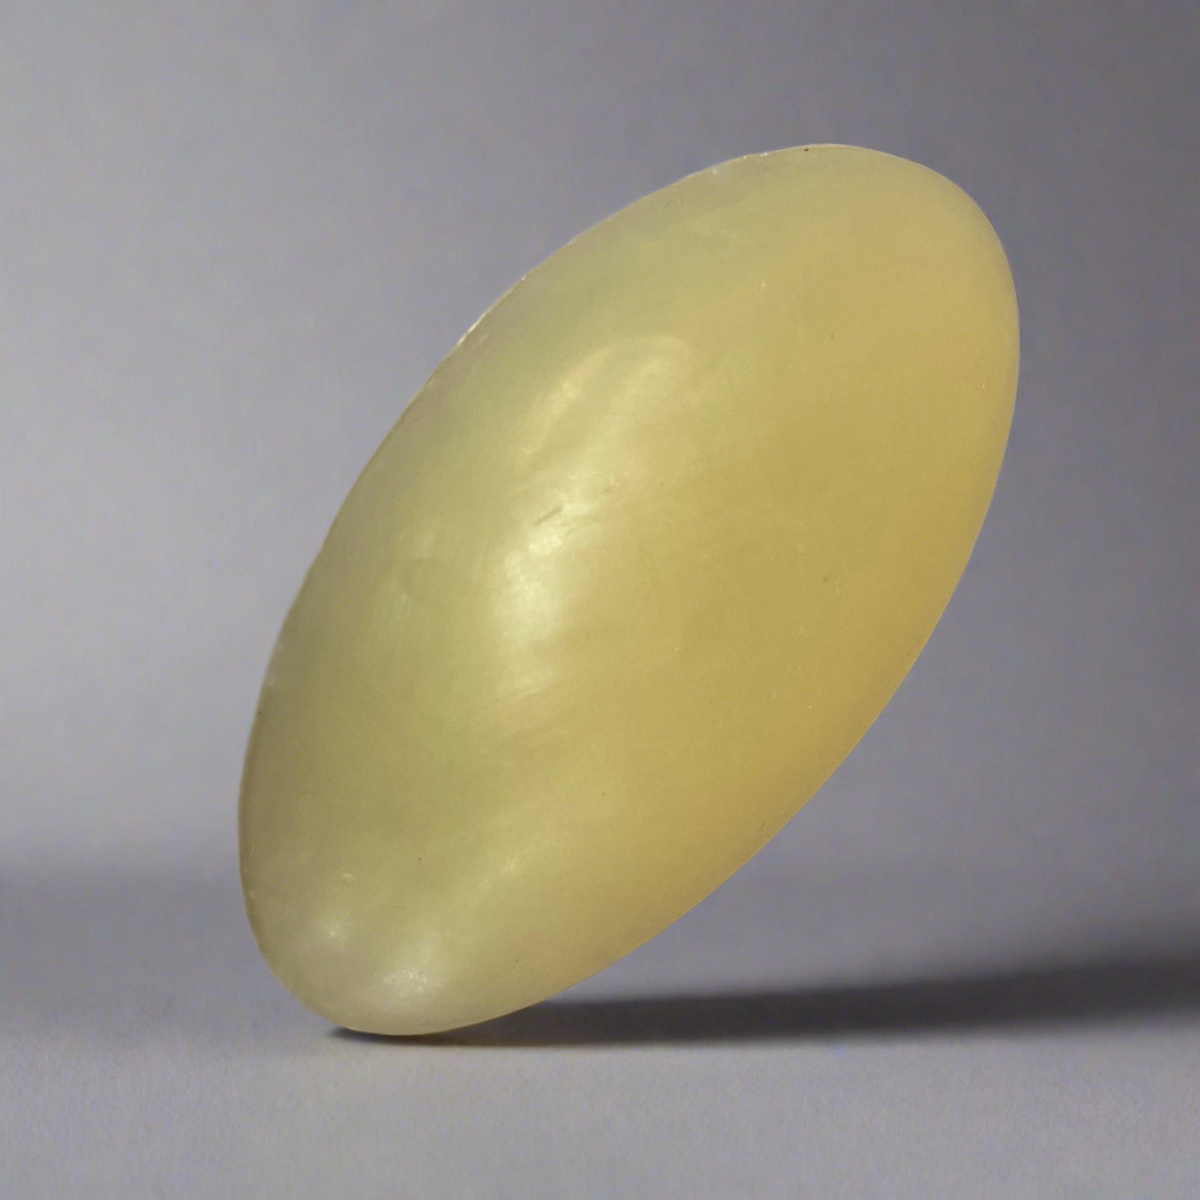 Contour-shaped argan oil soap, featuring a smooth surface for a comfortable grip